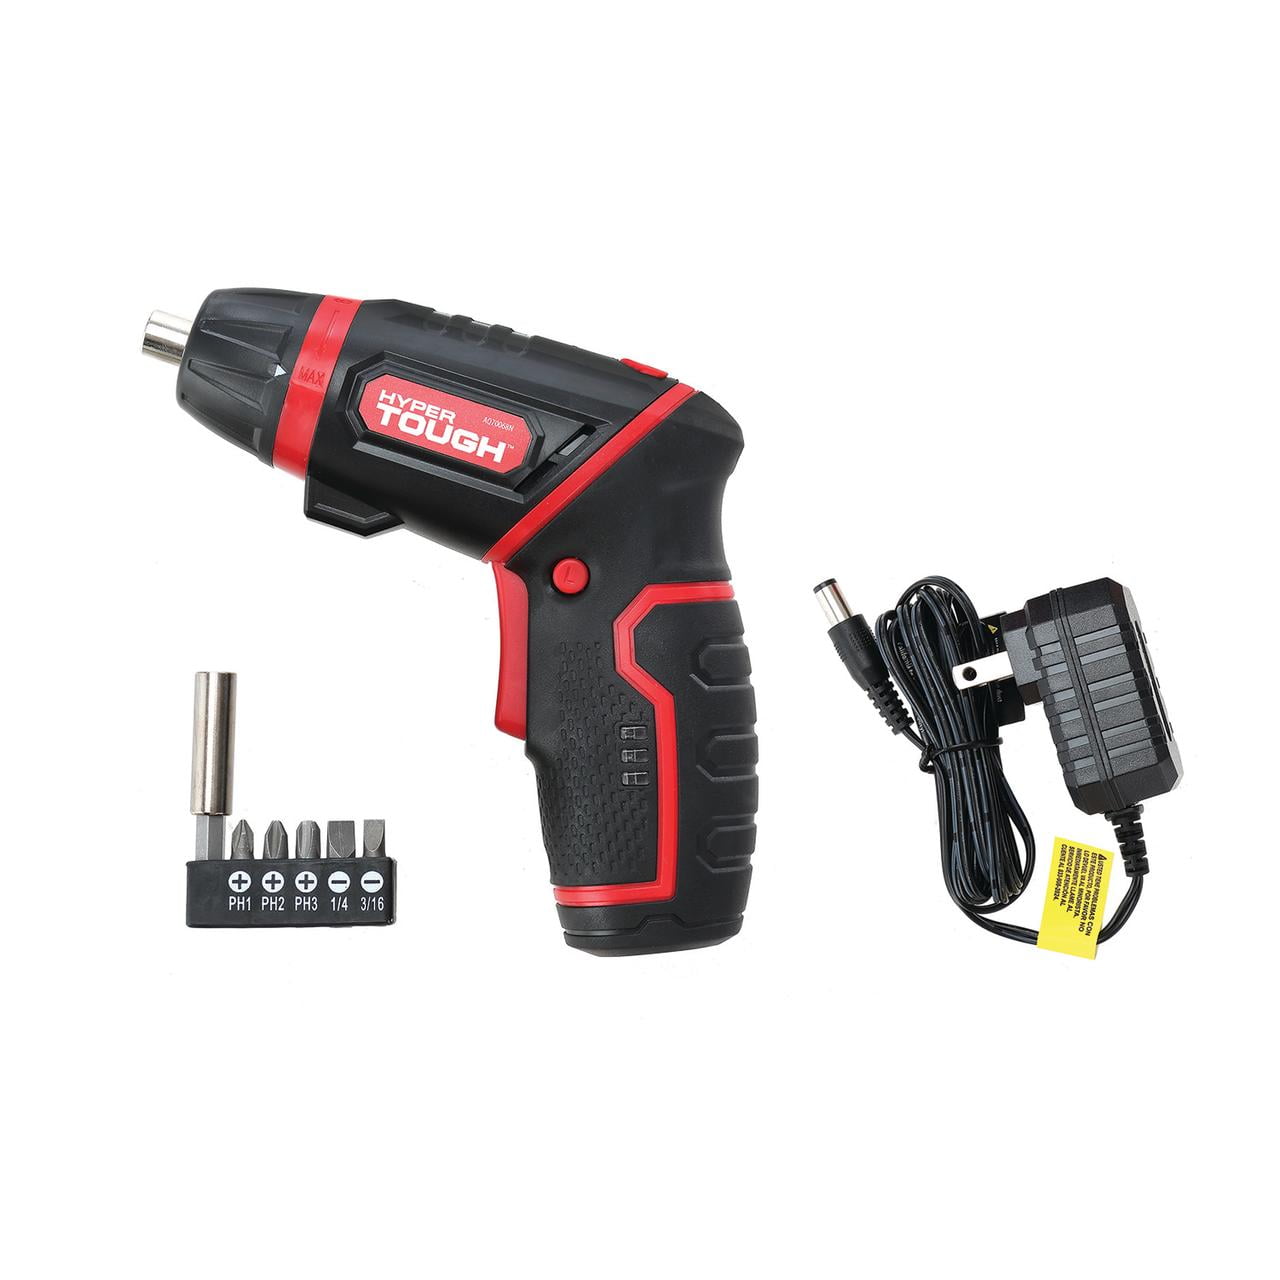 Hyper Tough 4V Max Lithium-Ion Cordless Rotating Power Screwdriver 1/4 inch with Charger, Rotating Handle, LED Light, Magnetic Bit Holder & Bits